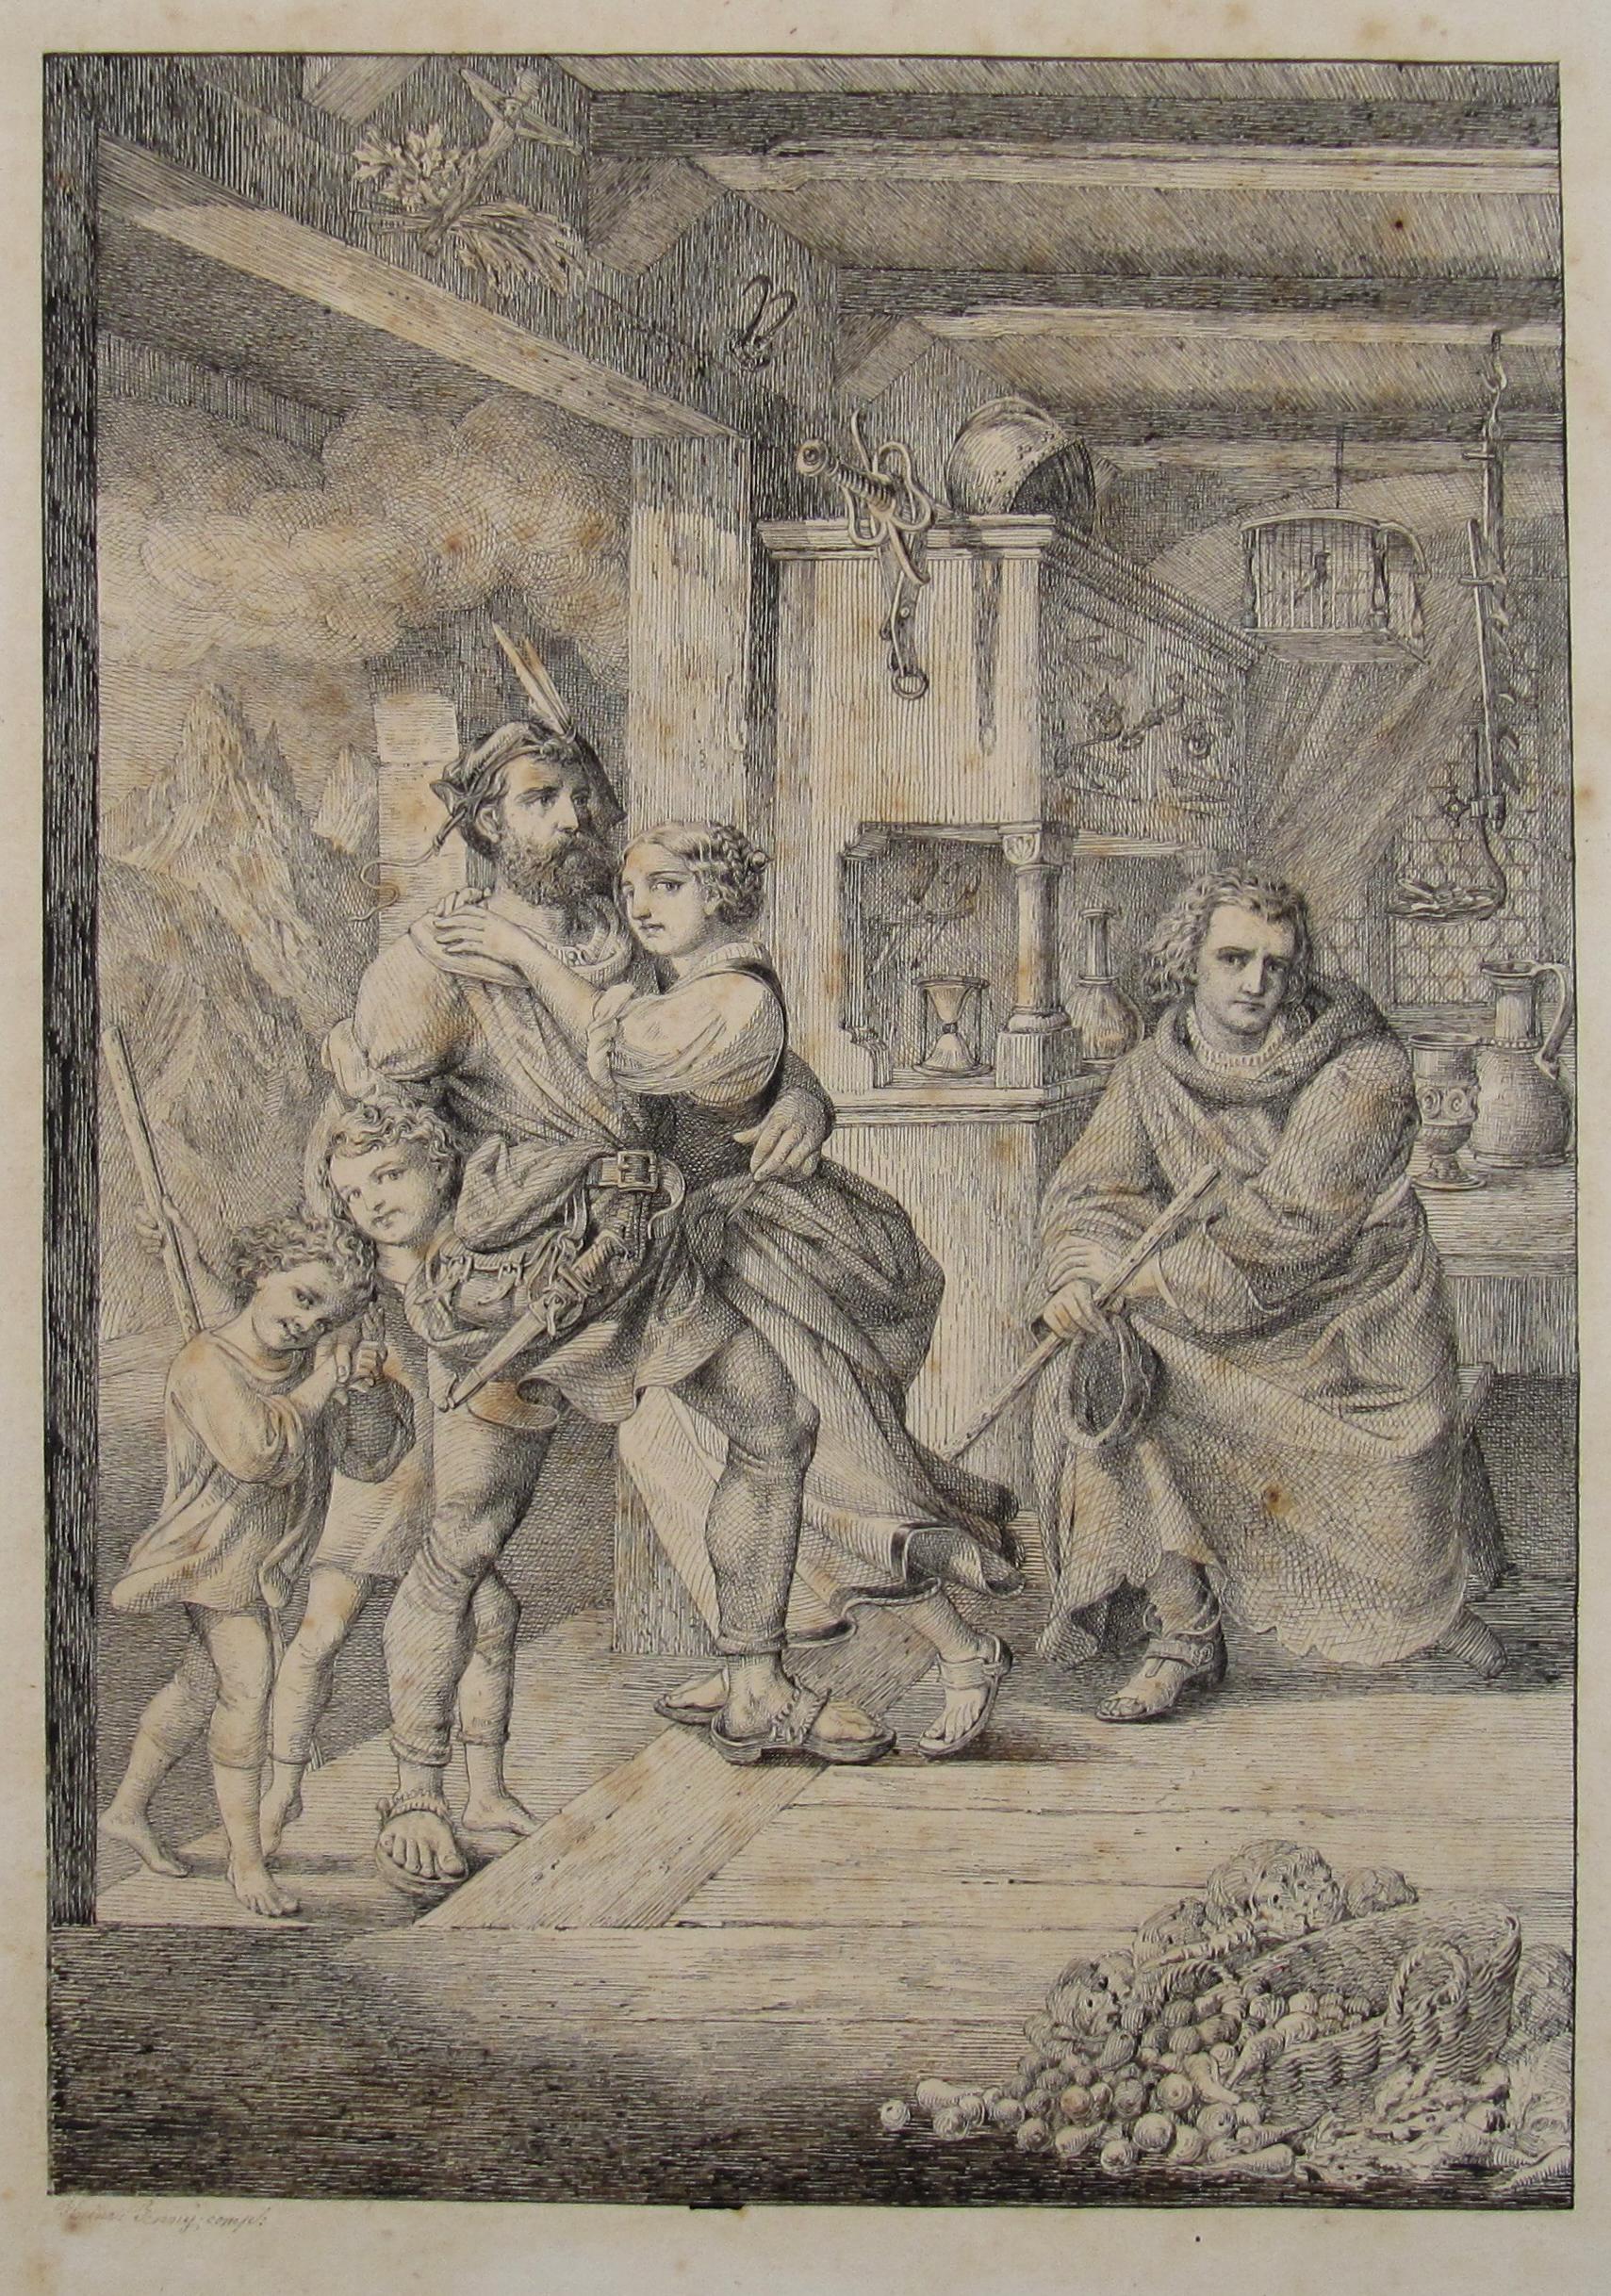 Heinrich Adam Elias Borny
(German, 1742-1778)

•	Late baroque Ink and pen drawing on laid paper (no watermark)
•	Sheet, ca. 29.4 x 22.7 cm
•	Image size, ca. 22.5 x 16.1 cm
•	Signed bottom left

Worldwide shipping is complimentary - There are no